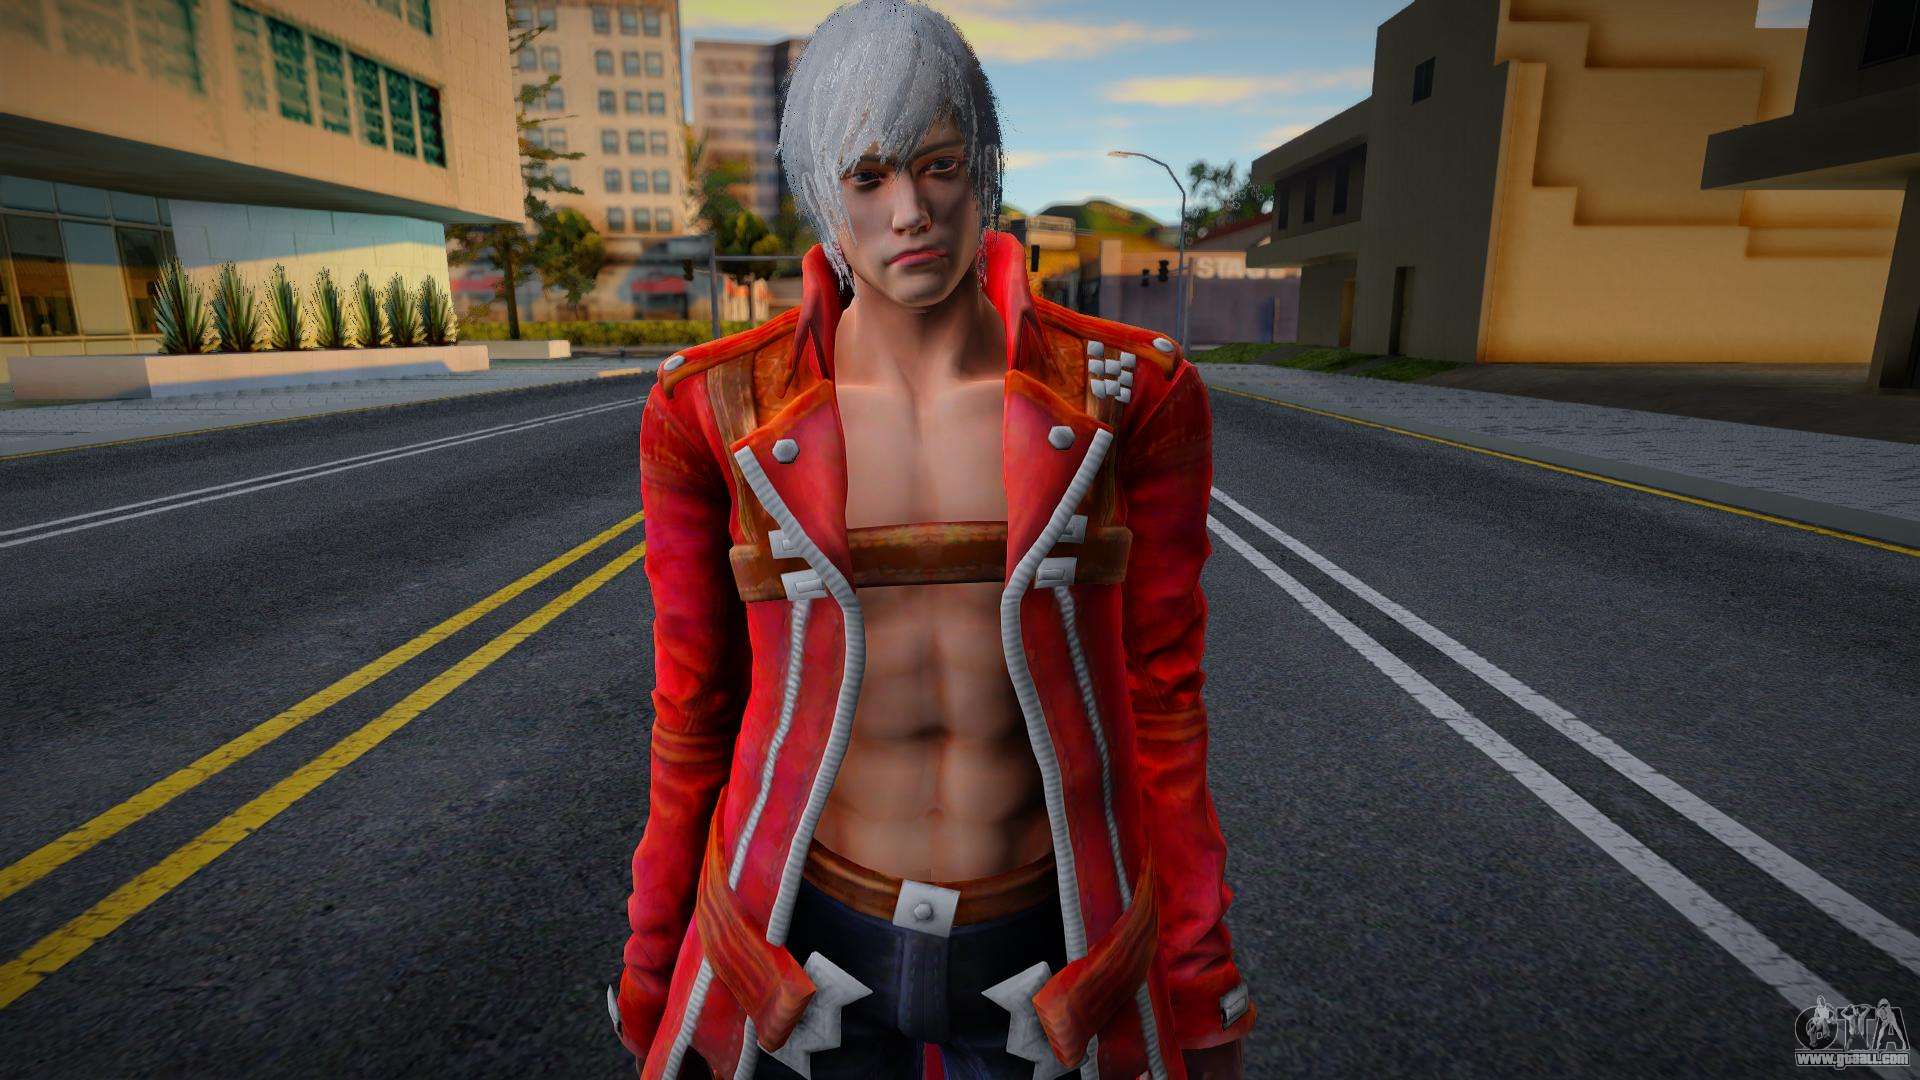 Download Demon Dante from the game Devil May Cry 4 for GTA San Andreas